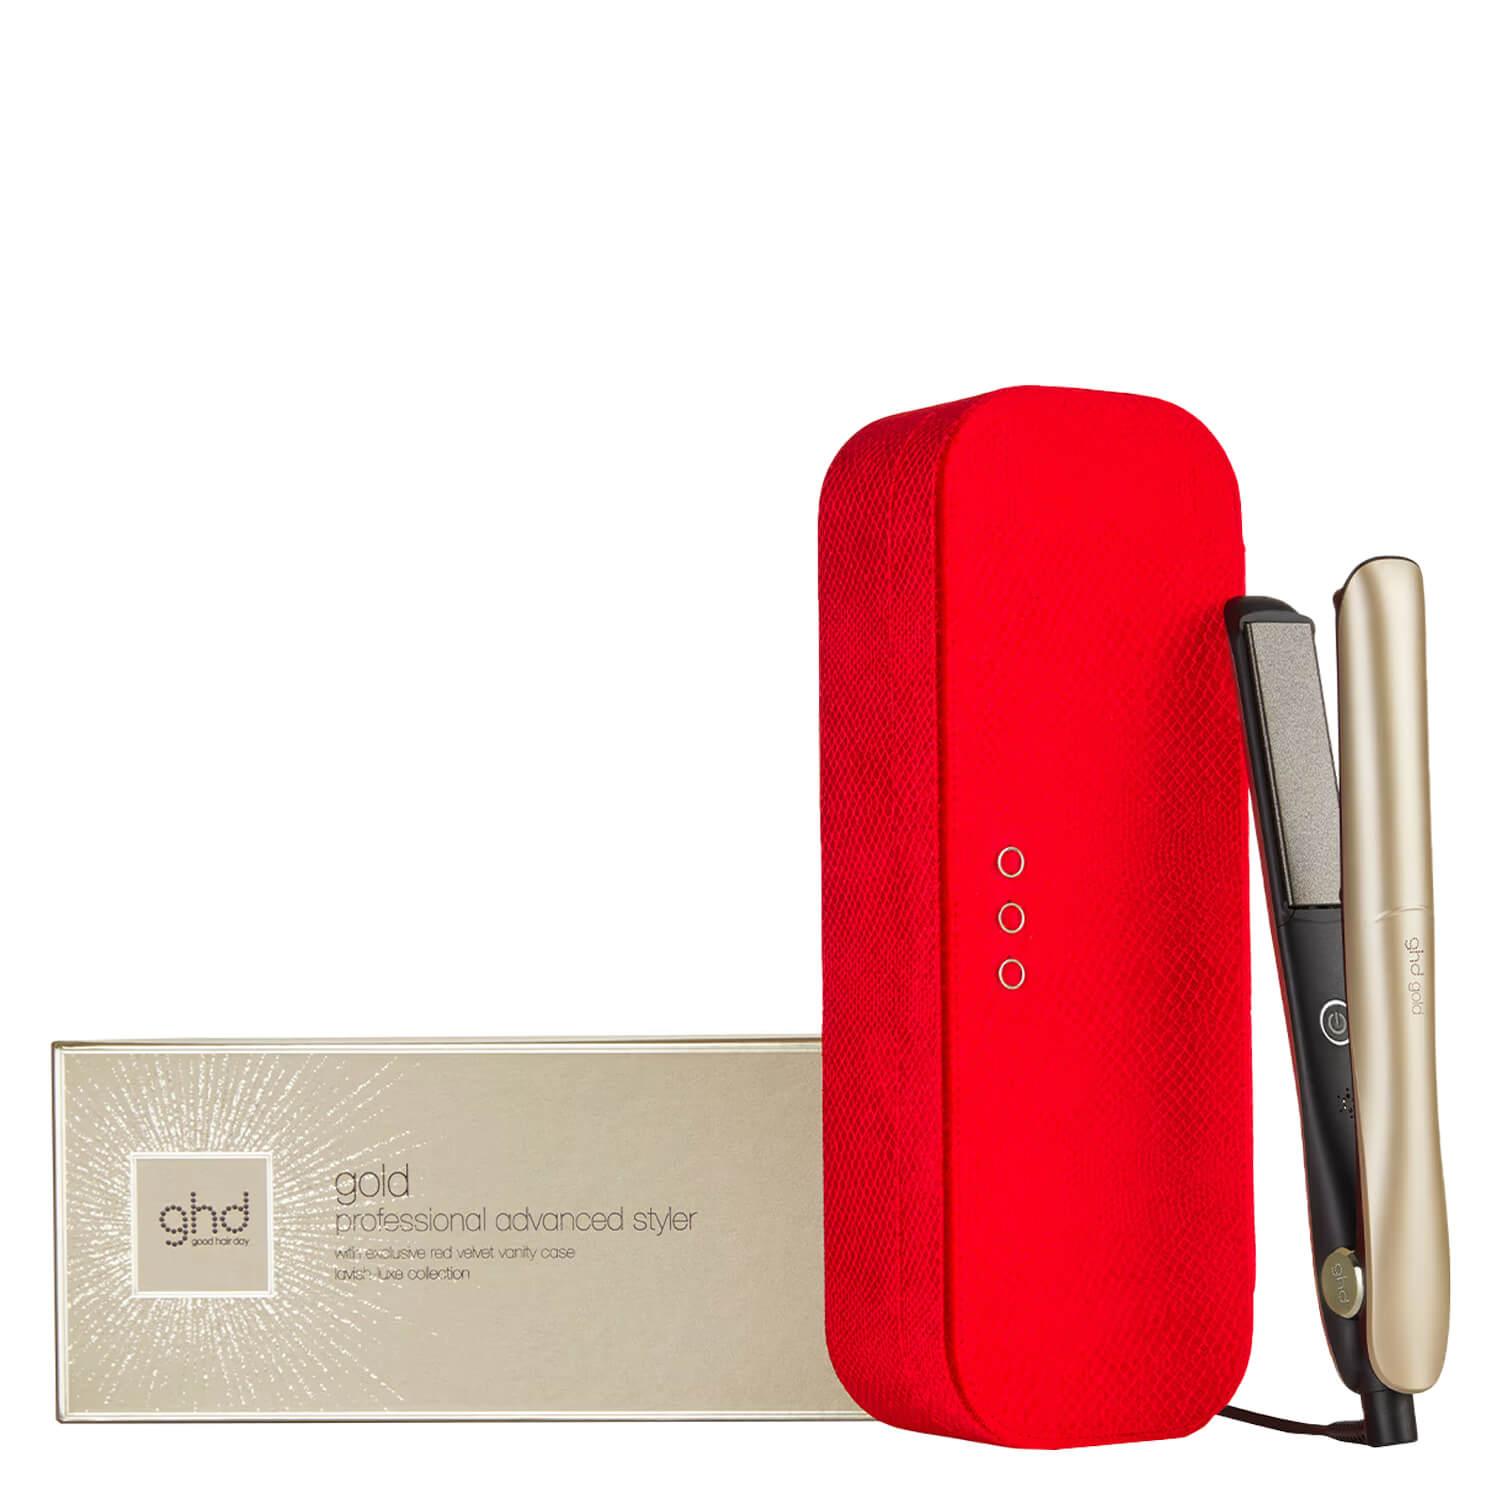 ghd Tools - Gold Classic Styler Gold